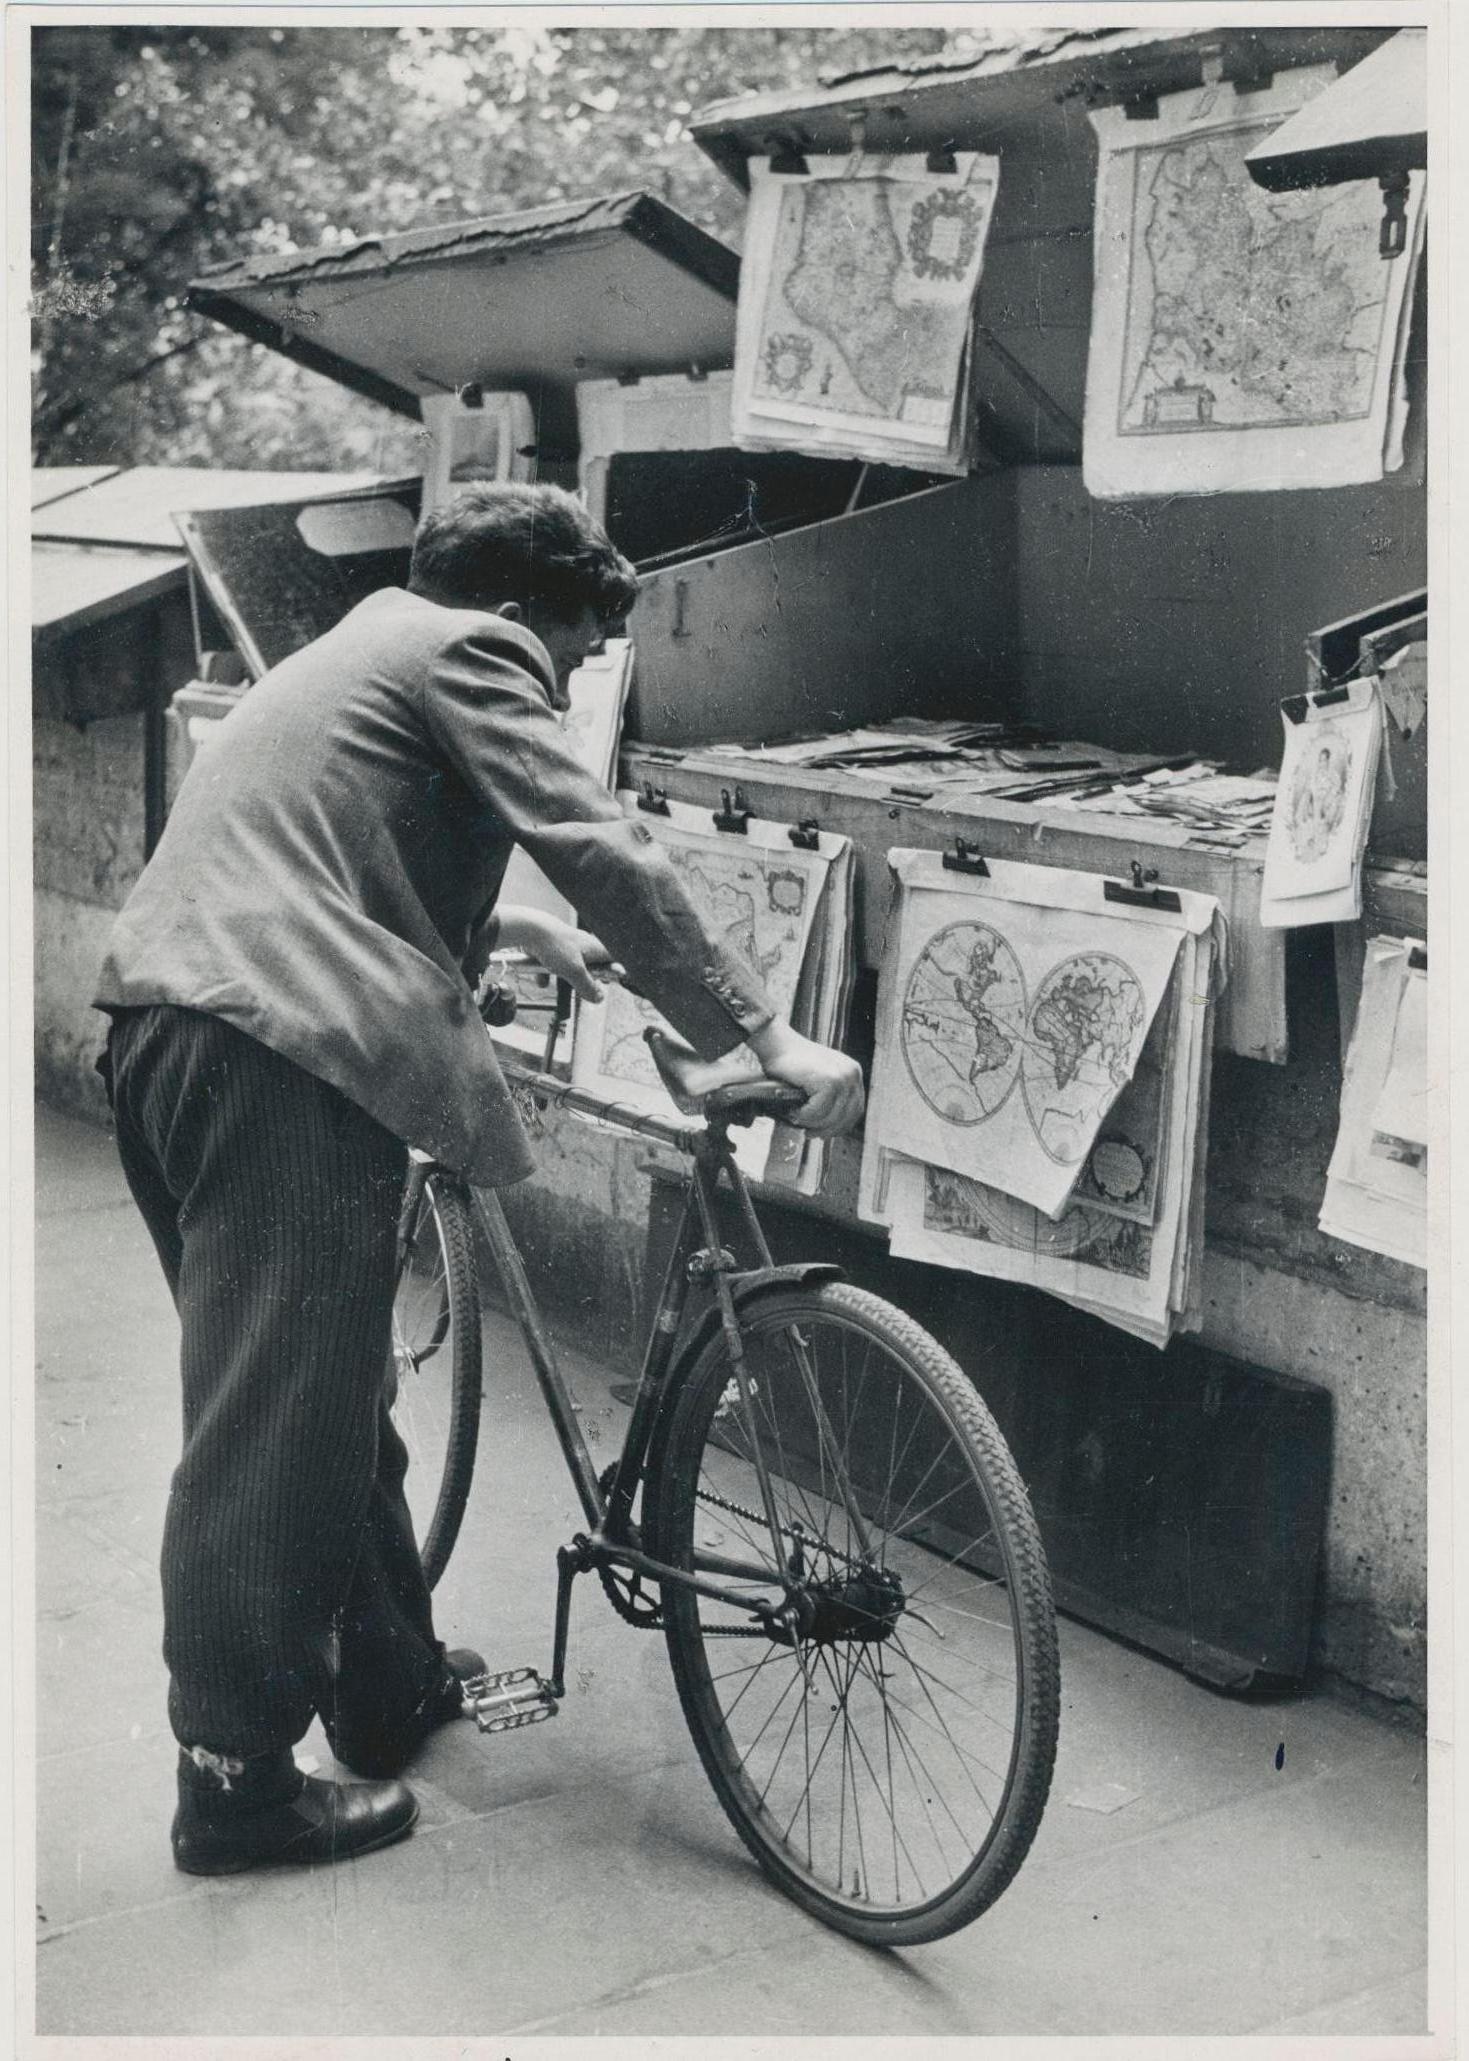 Erich Andres Black and White Photograph - Man; Bike; Street Photography; Black and White; Paris, 1950s, 17, 5 x 12, 2 cm